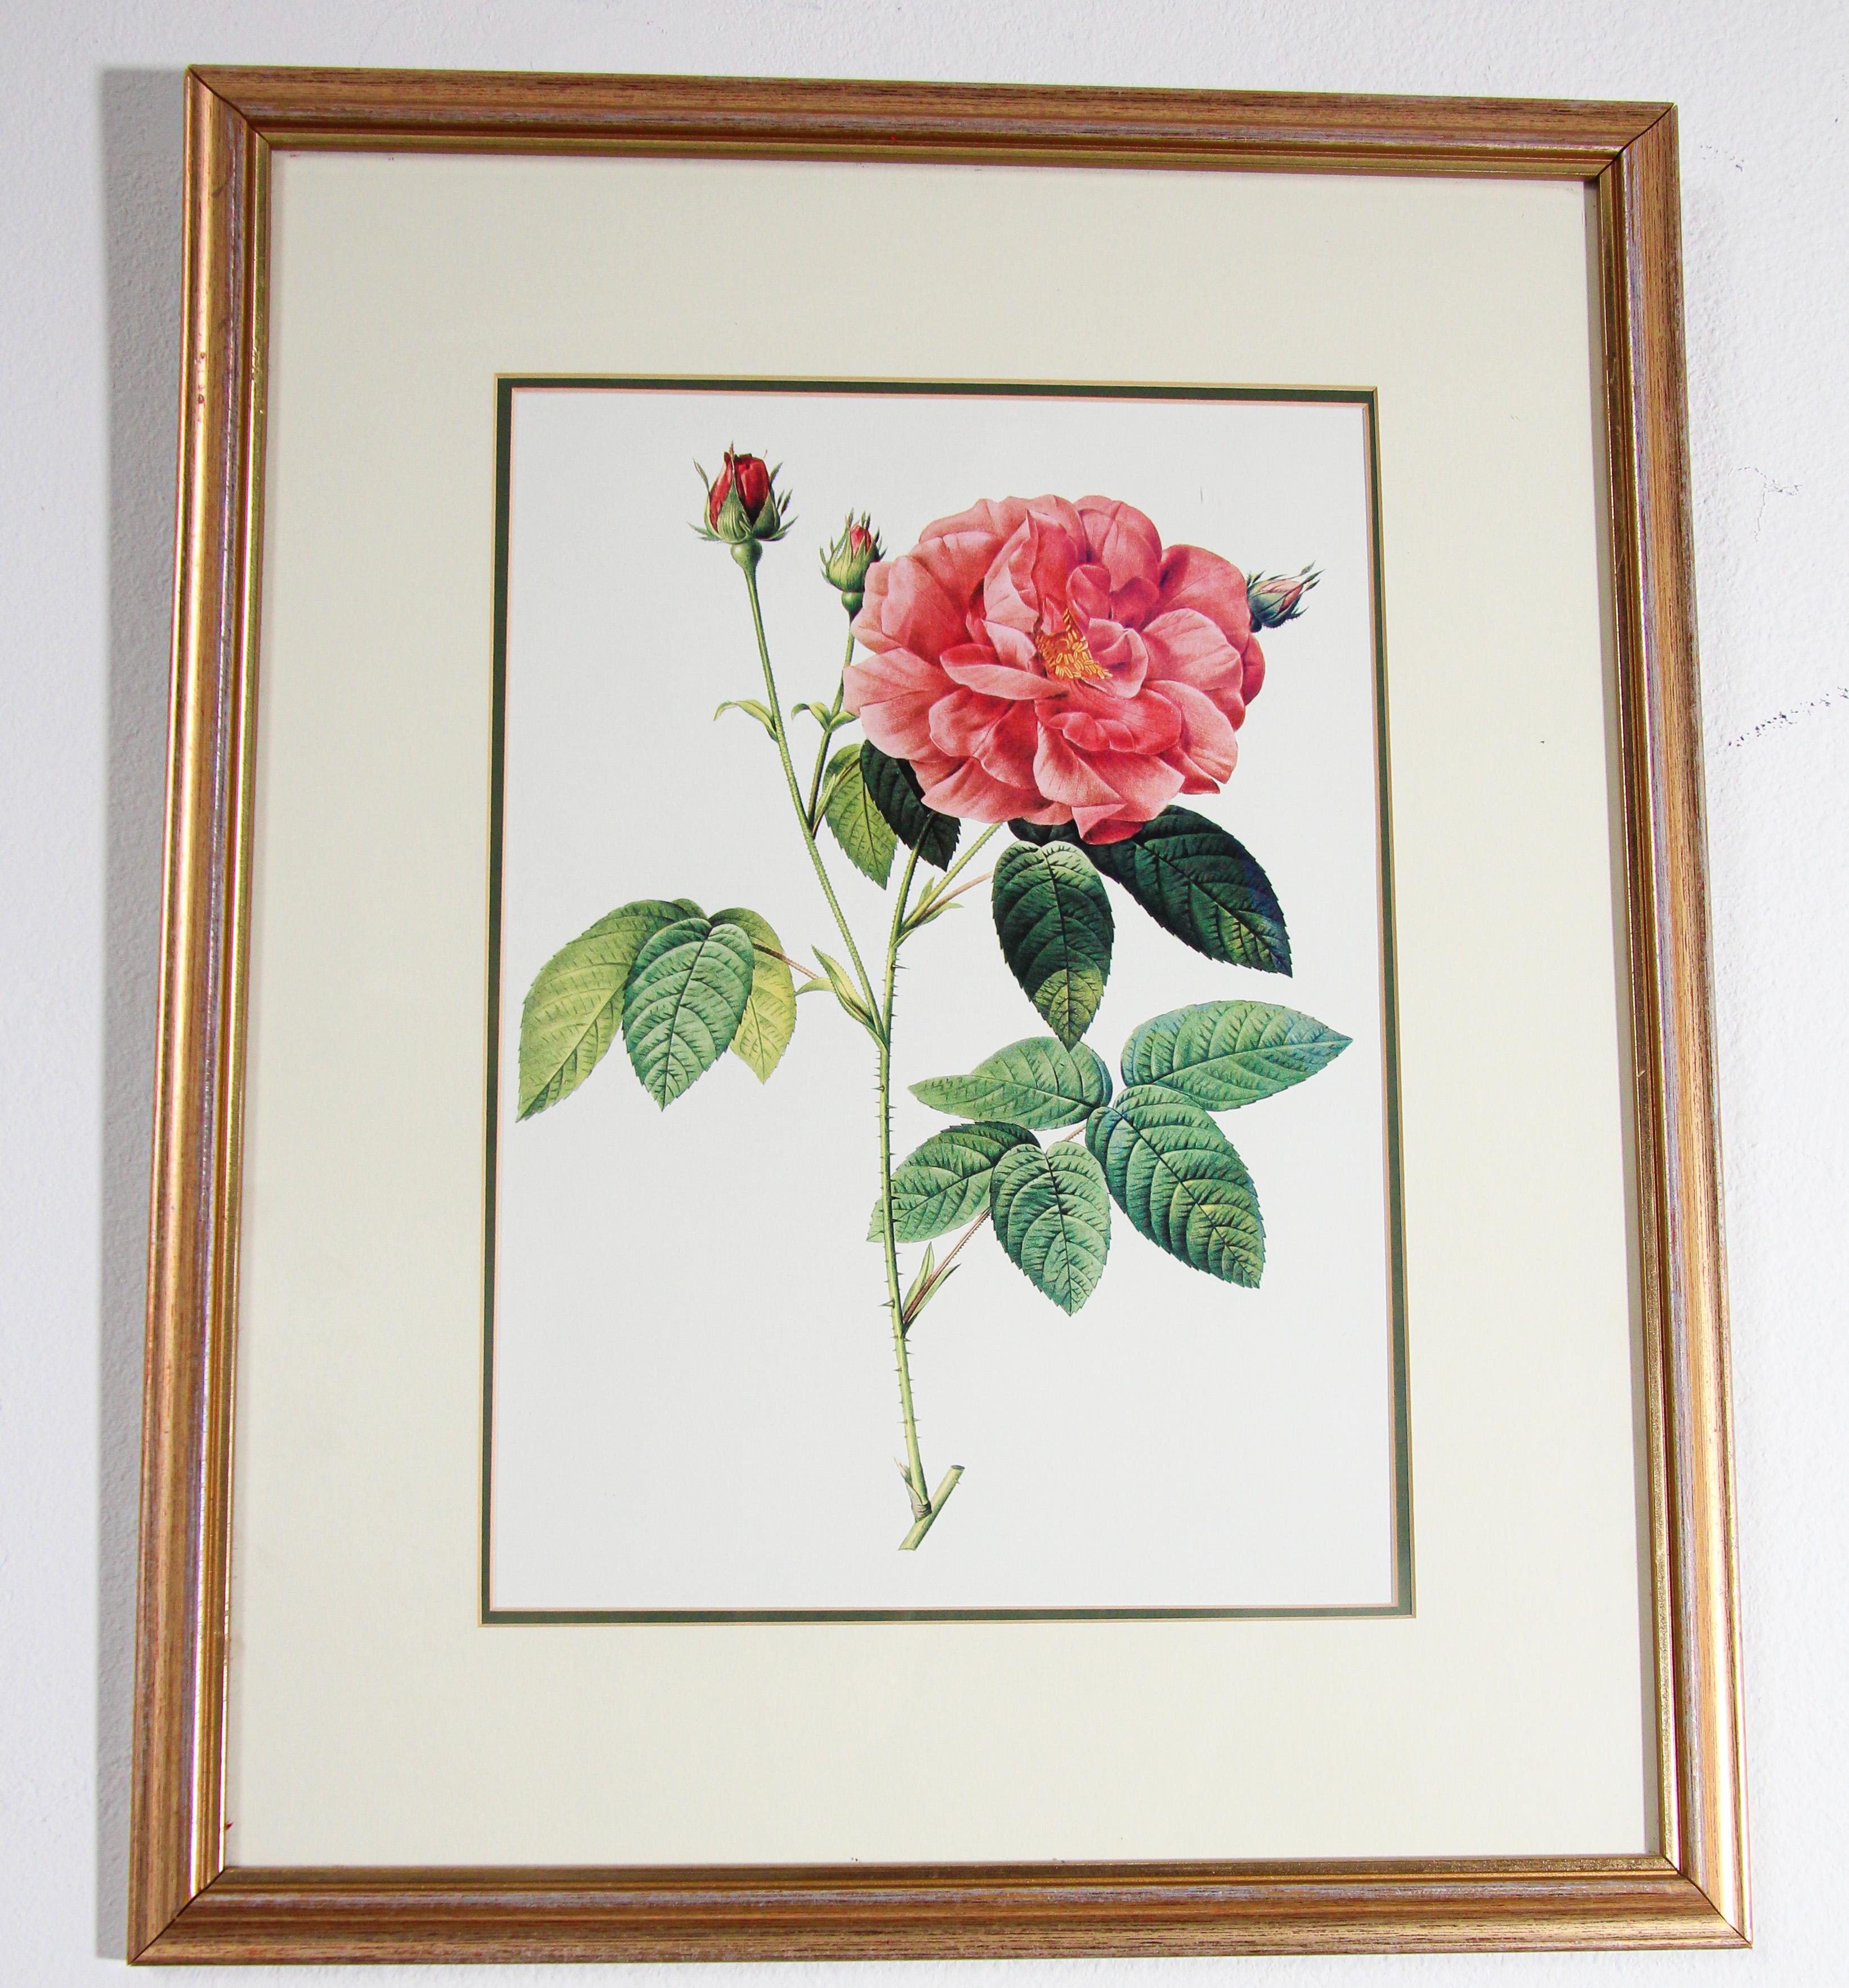 Pair of Botanical Rose Prints after Pierre-Joseph Redoute 1